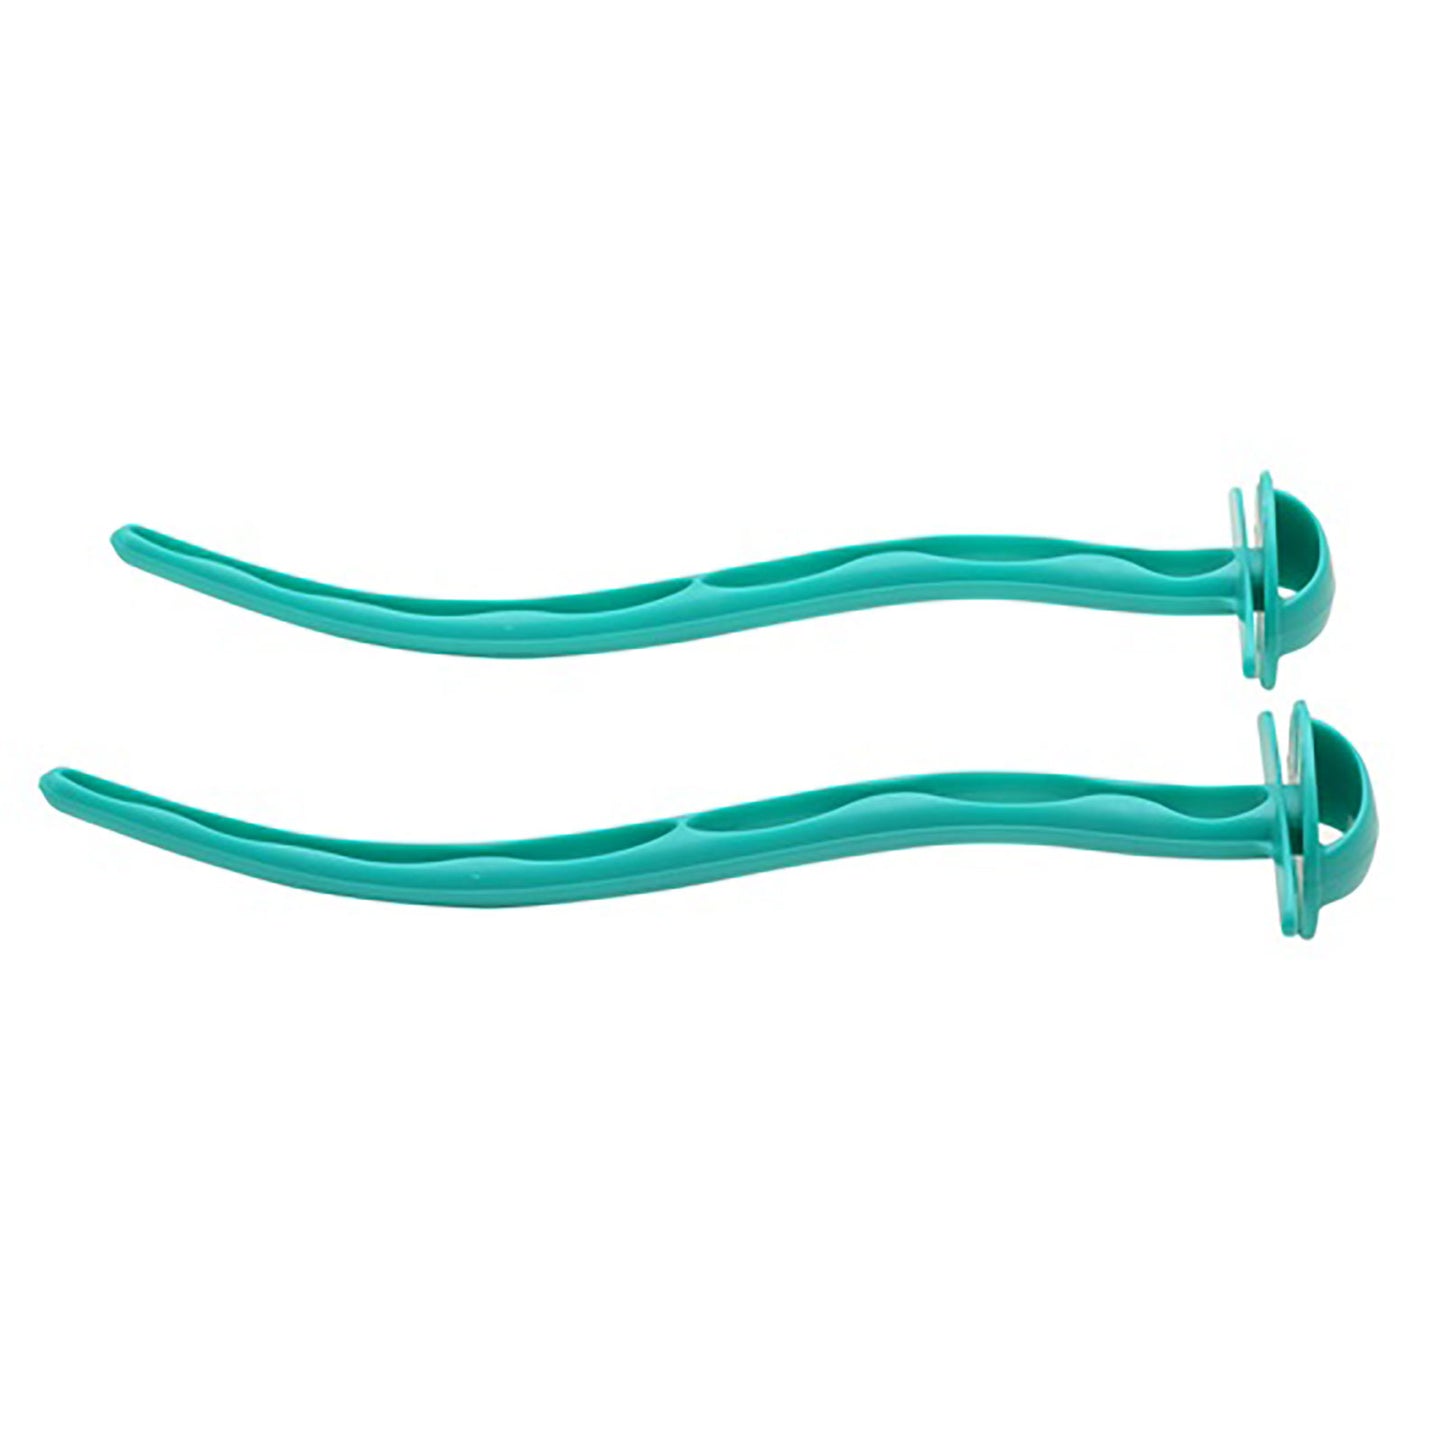 Vision Perch - Turquoise - Small/ Medium 2-pack